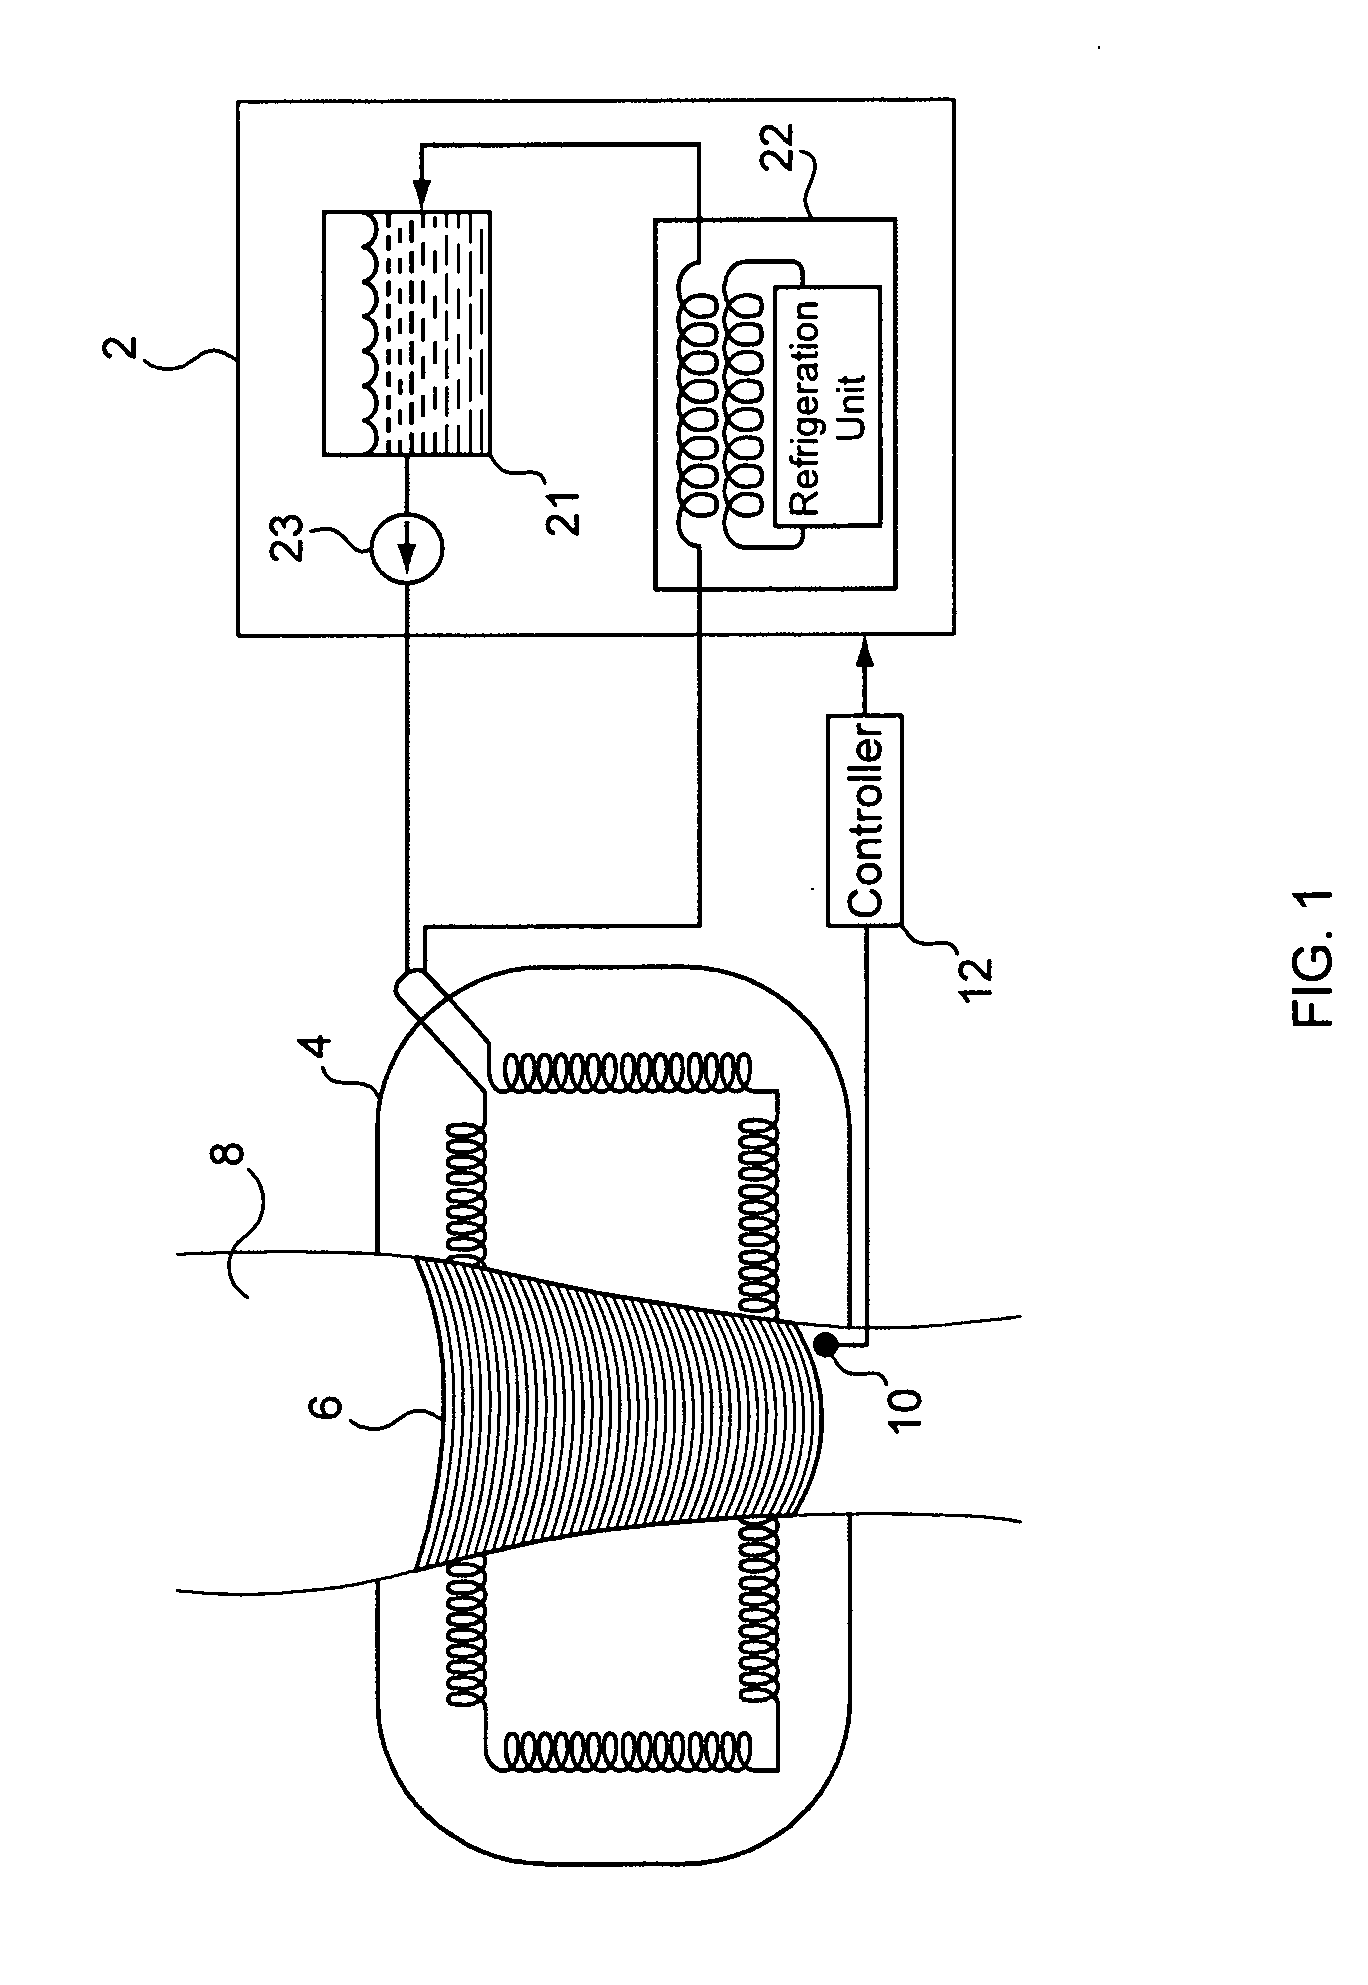 Therapeutic Cooling and/or Heating System Including A Thermo-Conductive Material